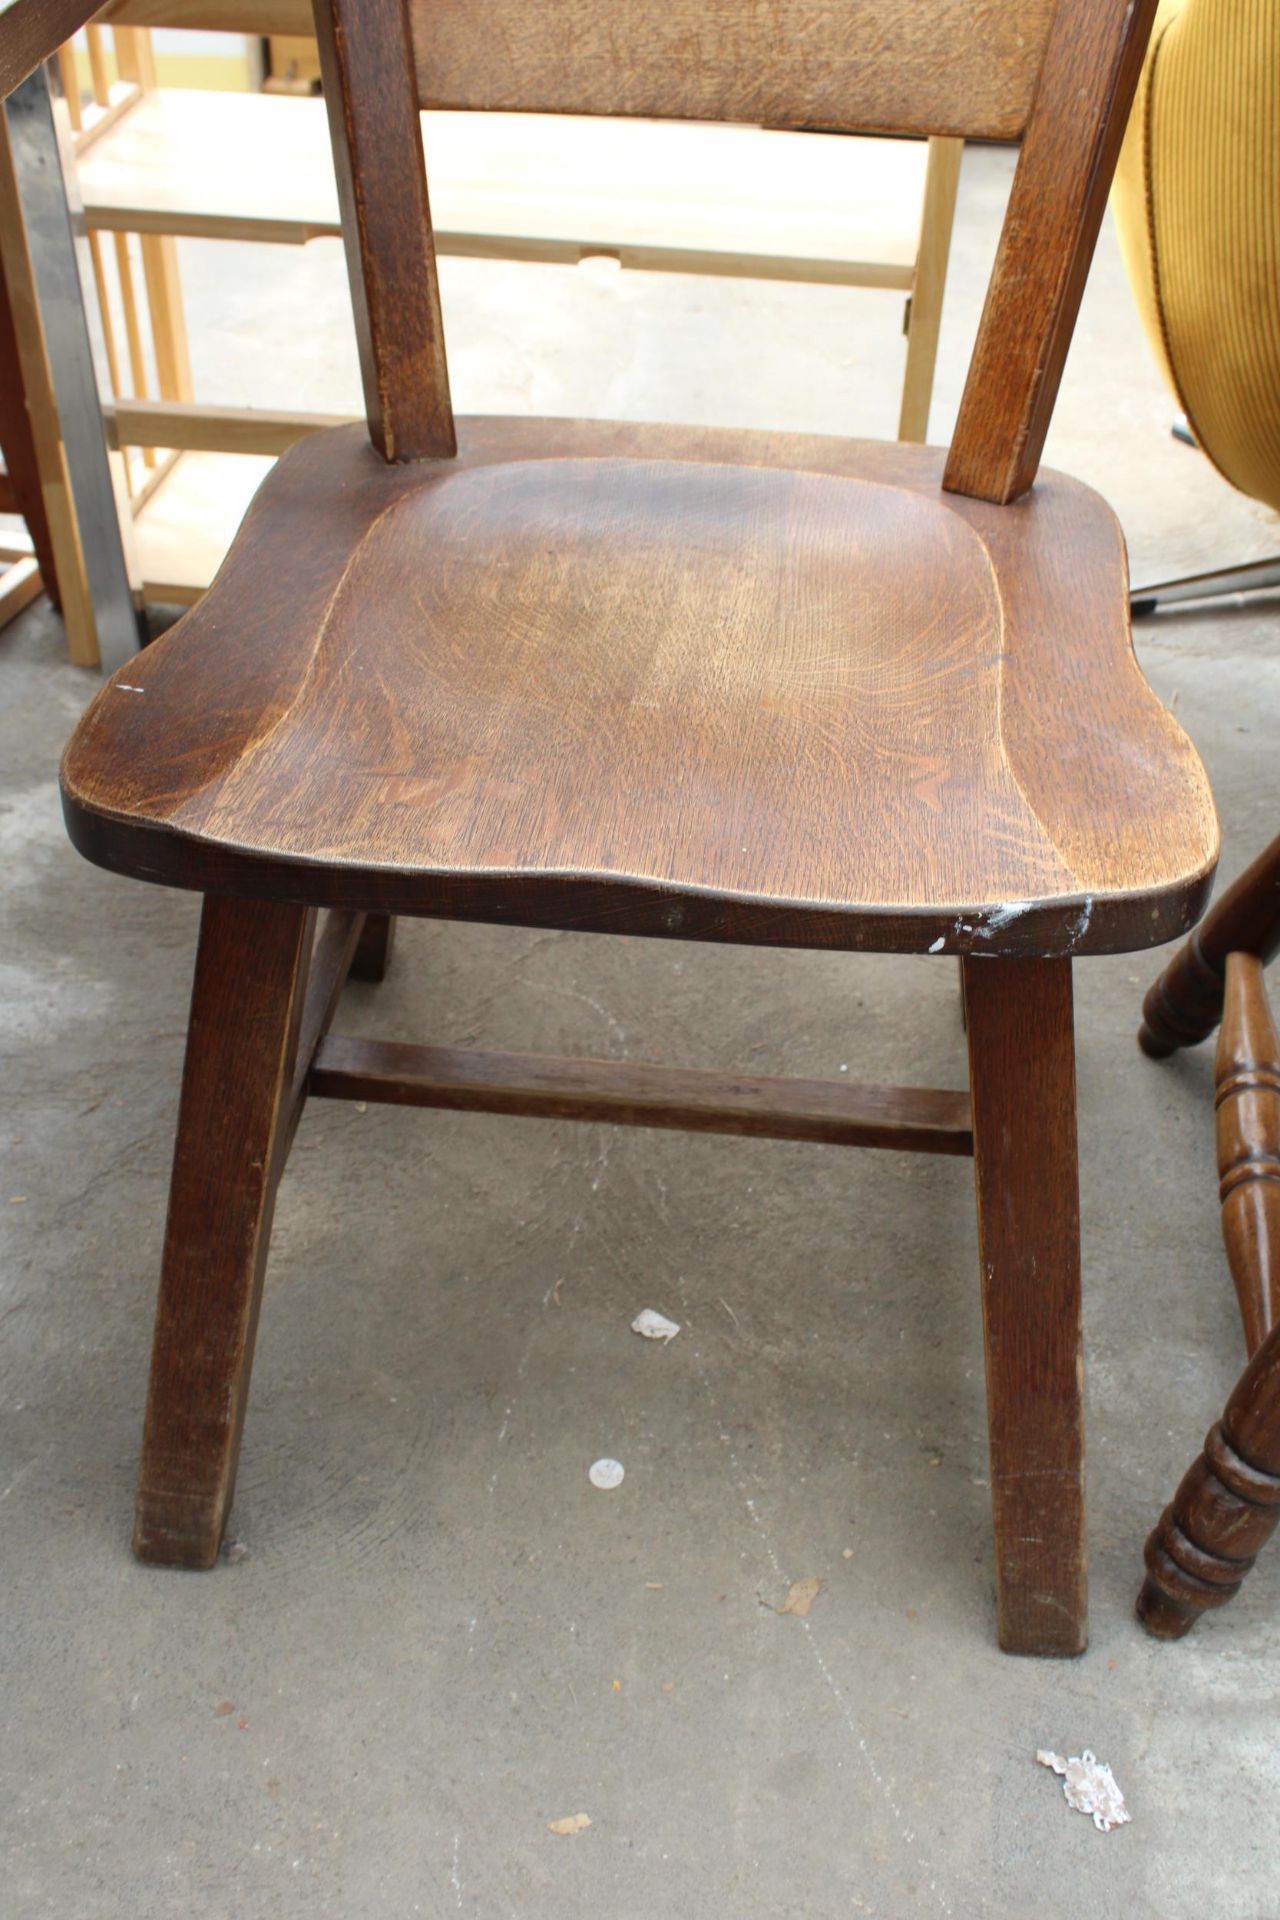 A MID TWENTIETH CENTURY OAK LADDER BACK CHAIR AND HARDWOOD KITCHEN CHAIR - Image 2 of 3